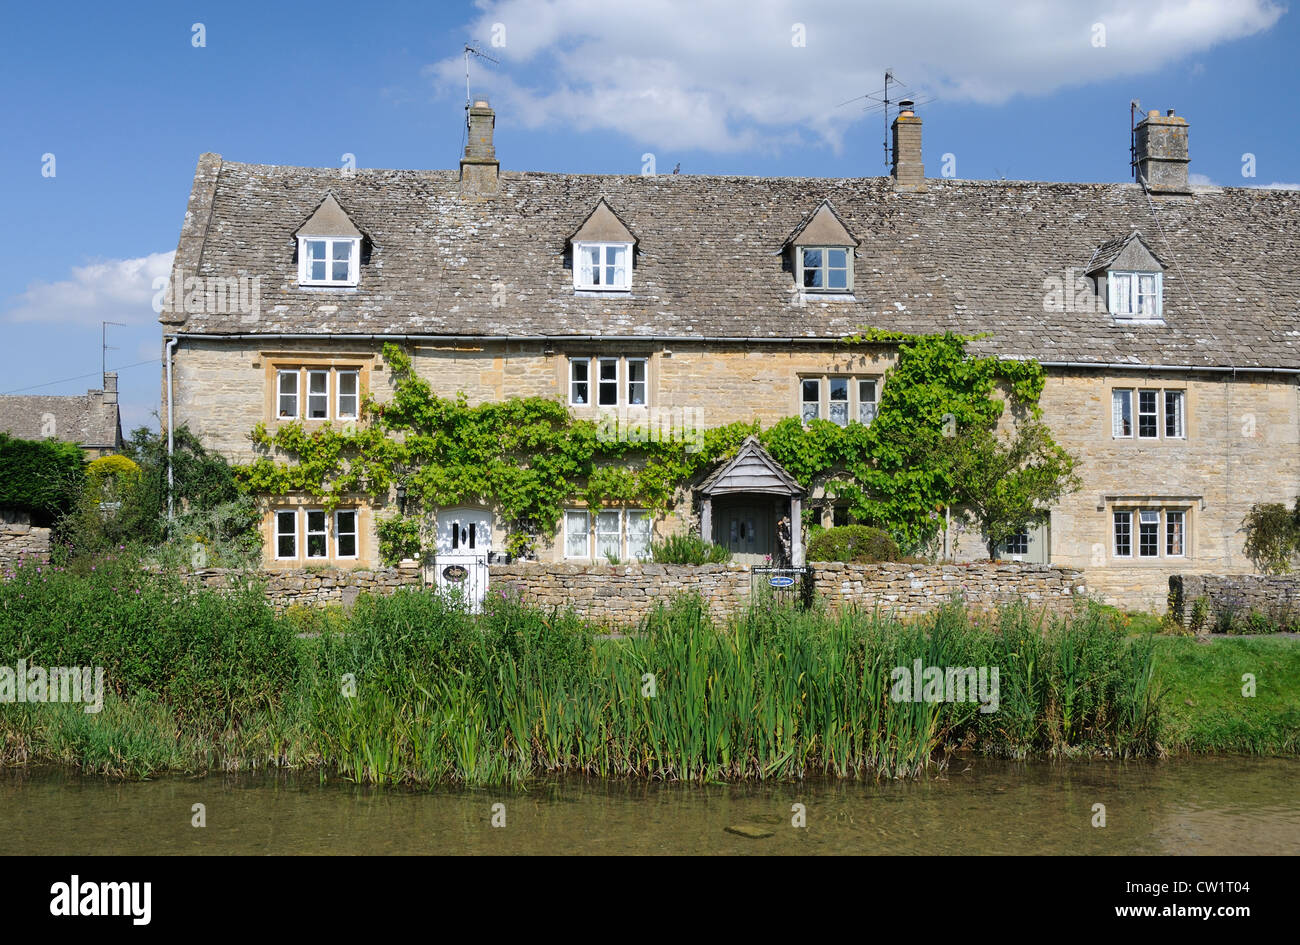 Cottages dal fiume occhio in Lower Slaughter, Gloucestershire, Inghilterra Foto Stock